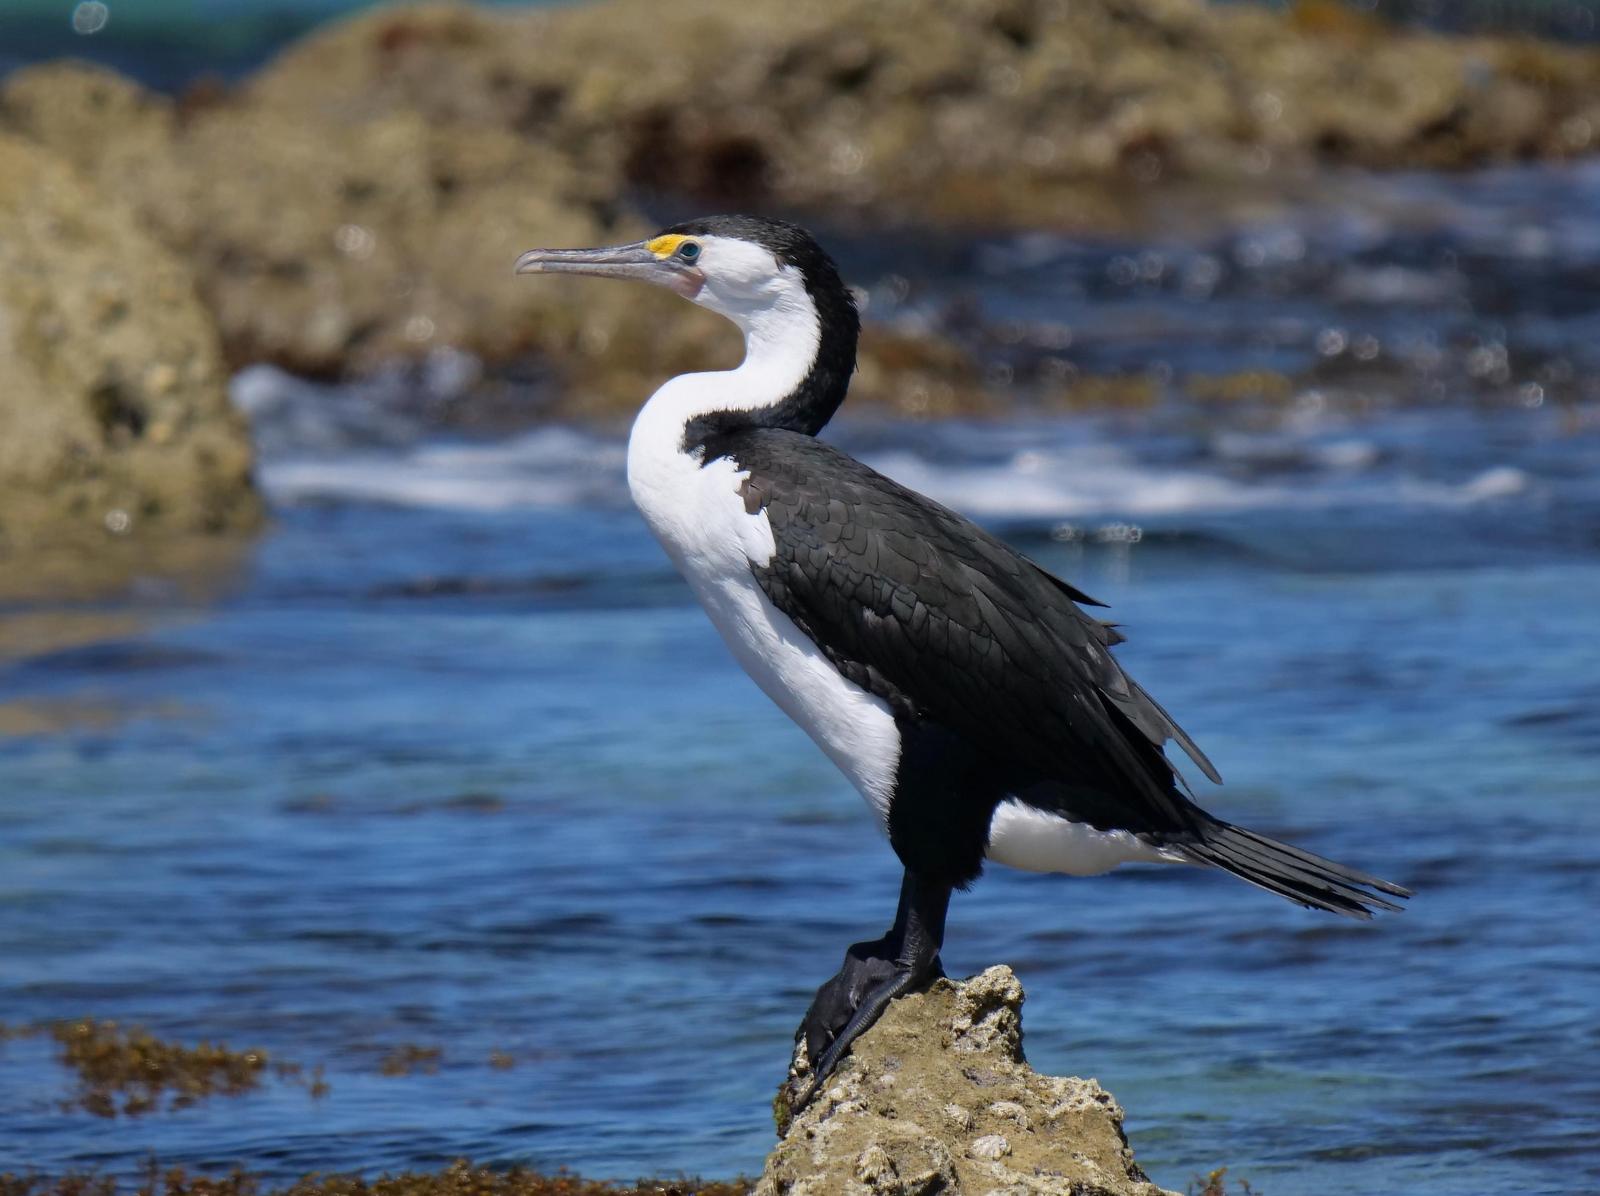 Pied Cormorant Photo by Peter Lowe